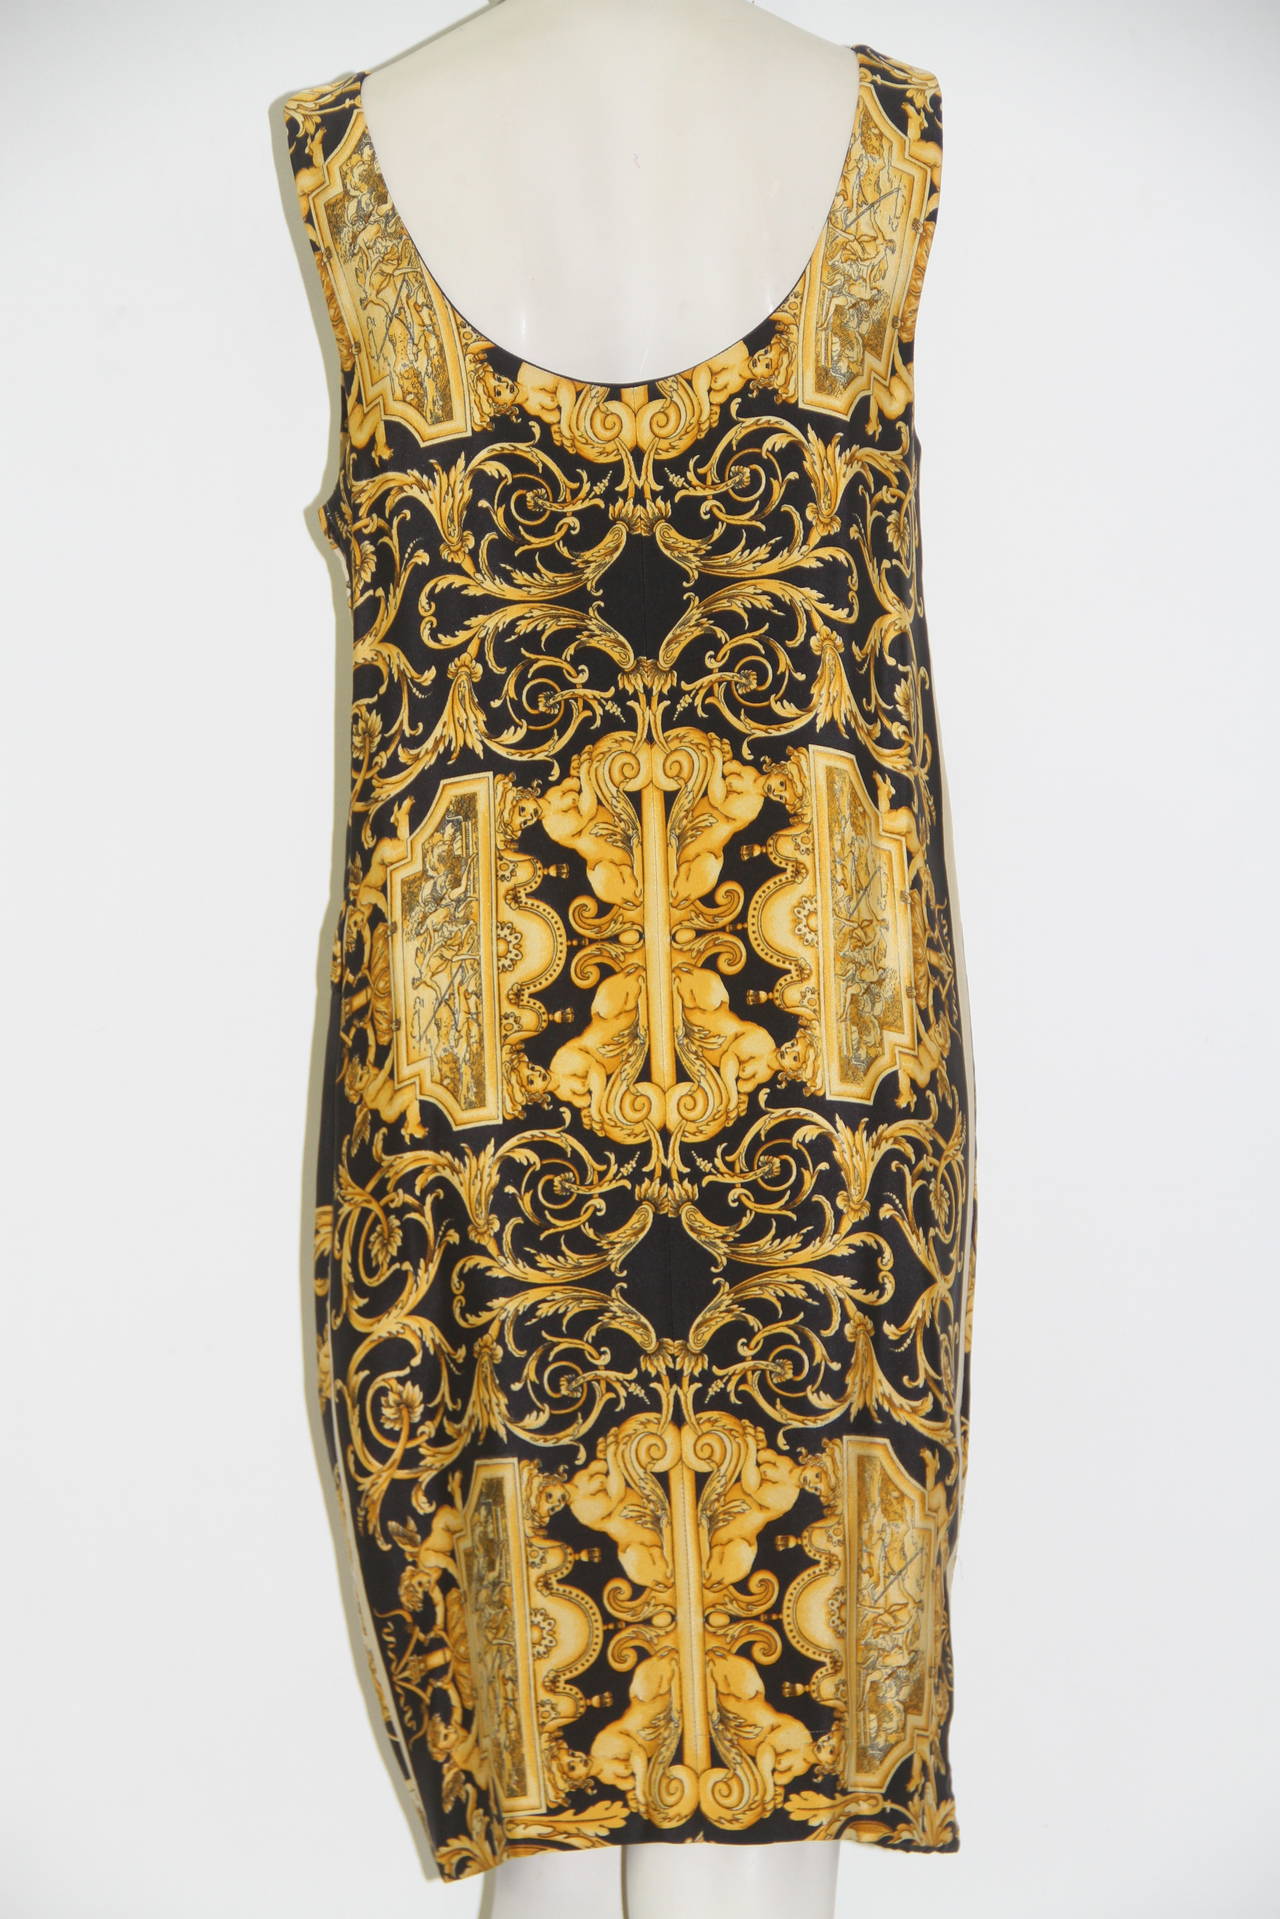 Iconic and rare Gianni Versace Baroque printed silk shift dress from Spring 1992 collection. The dress was featured in the advertising campaign for the collection.

Marked an Italian size 40.

Manufacturer - Alias S.p.a.

Fabric content - 100%